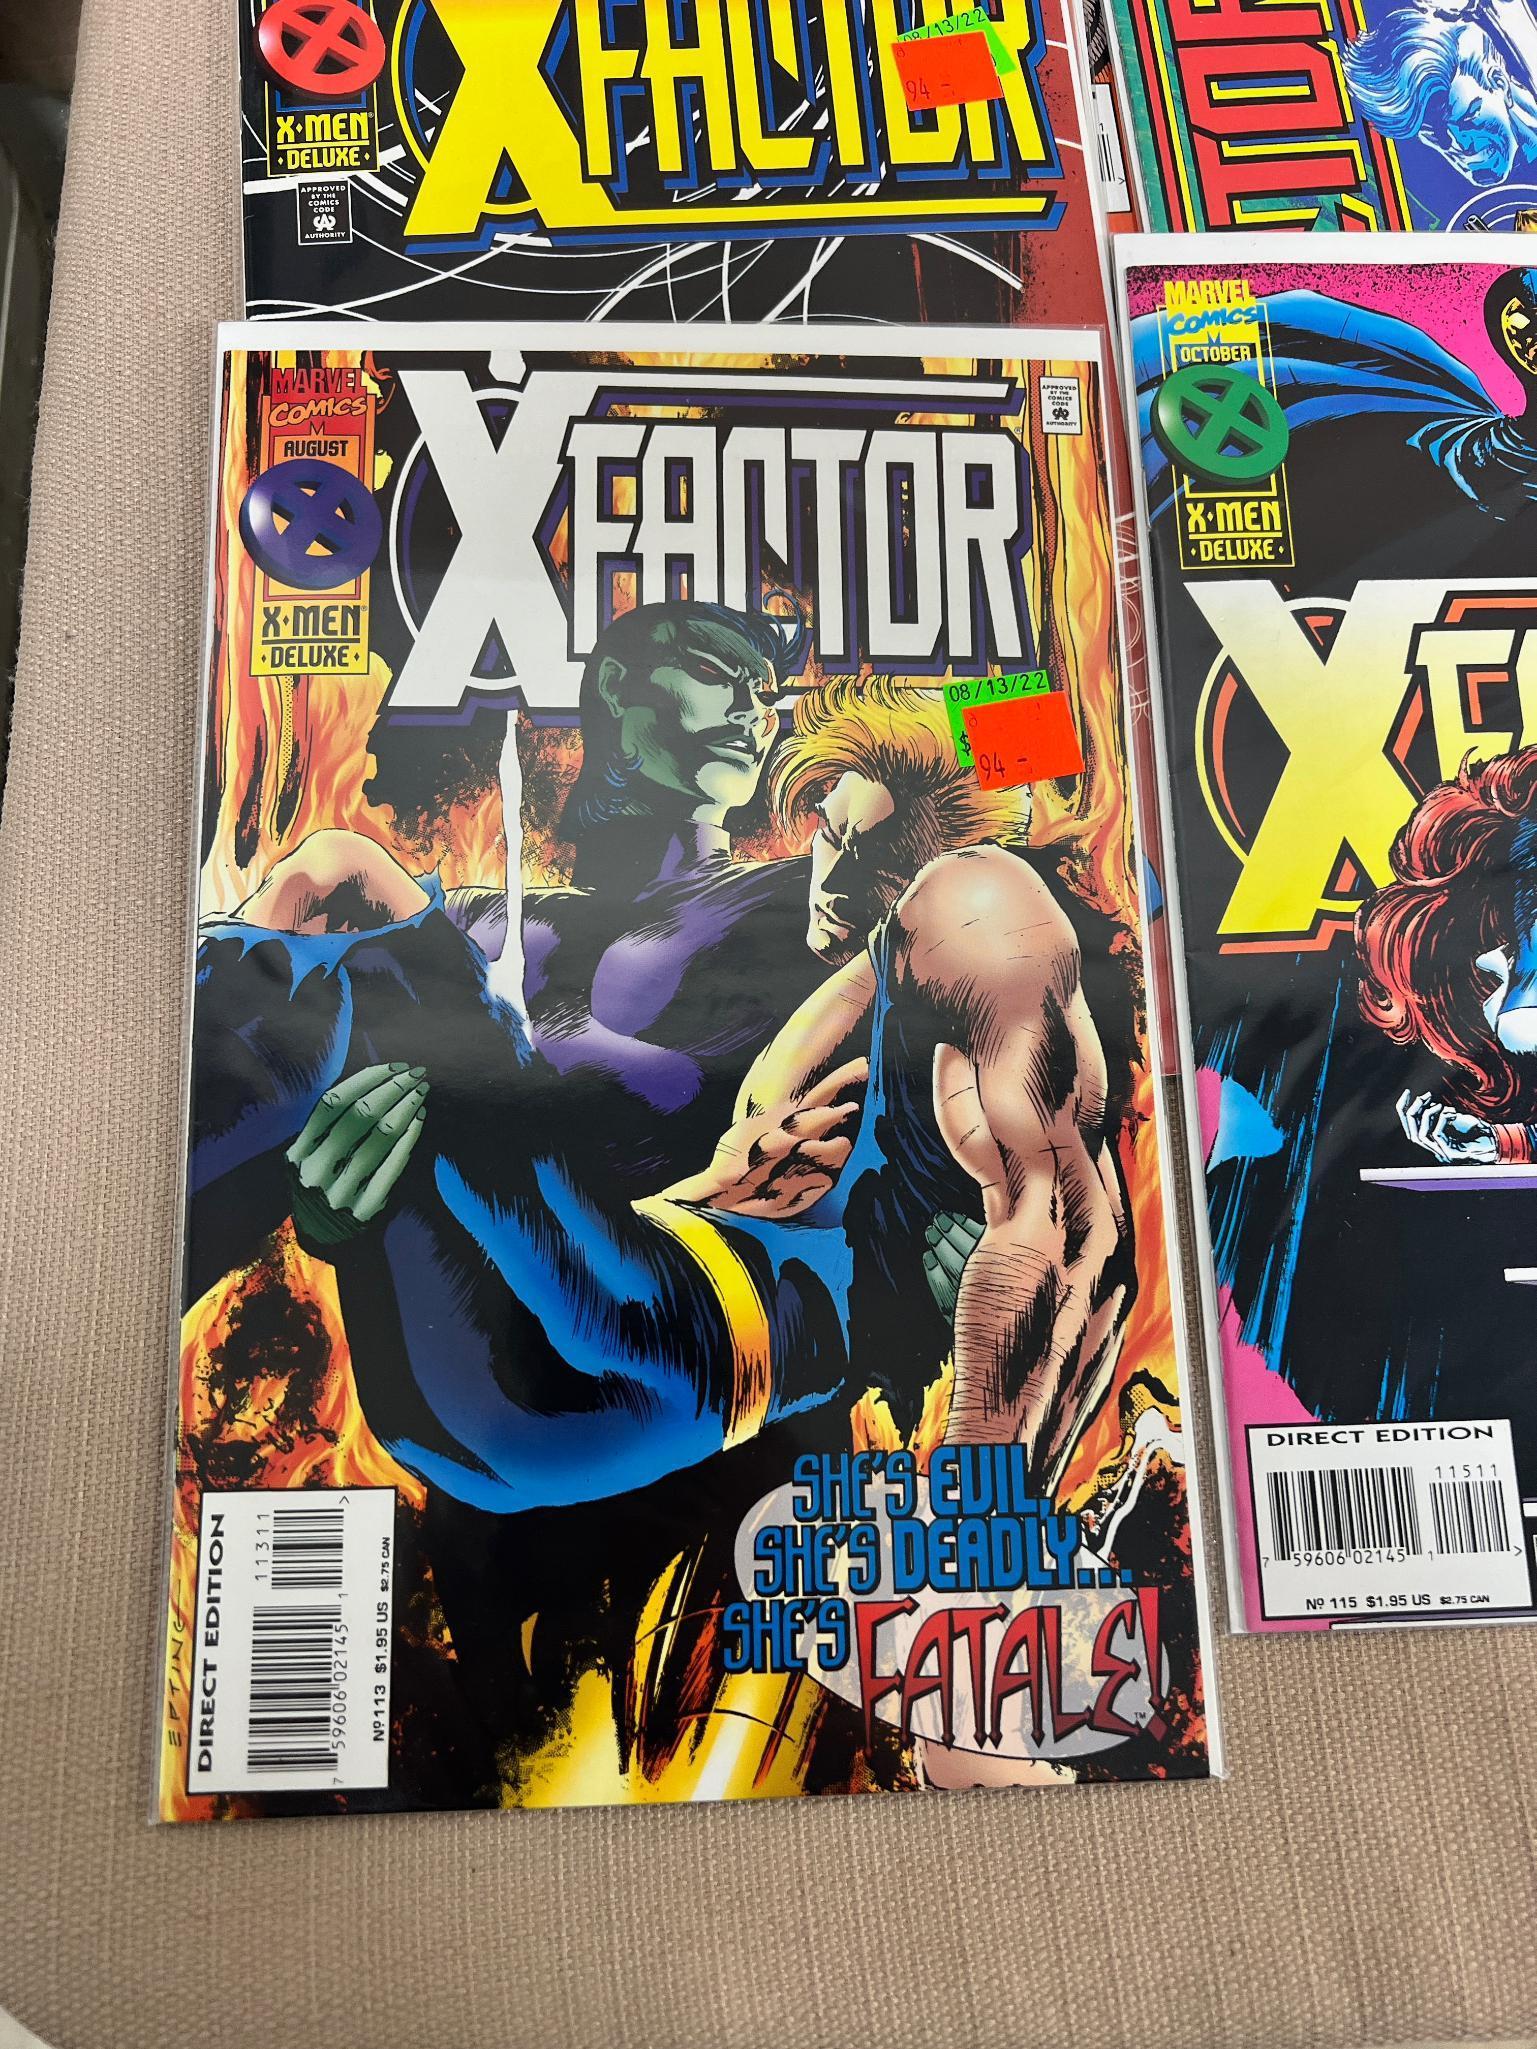 27 X Factor Comic Books Various issues incl 148 among others